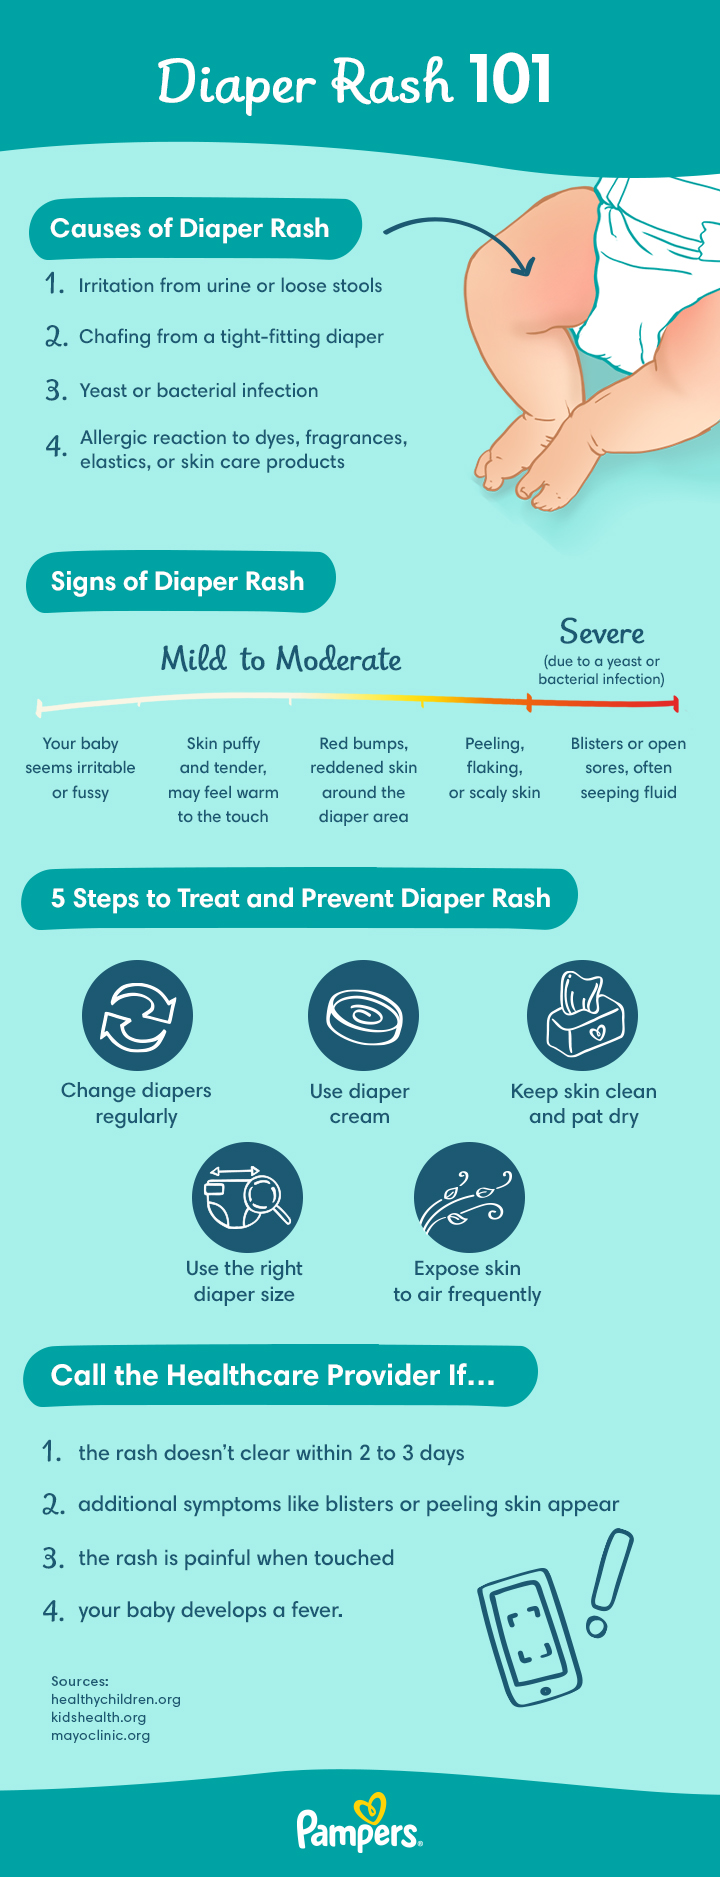 Types of diaper rash: Pictures, causes, and treatments